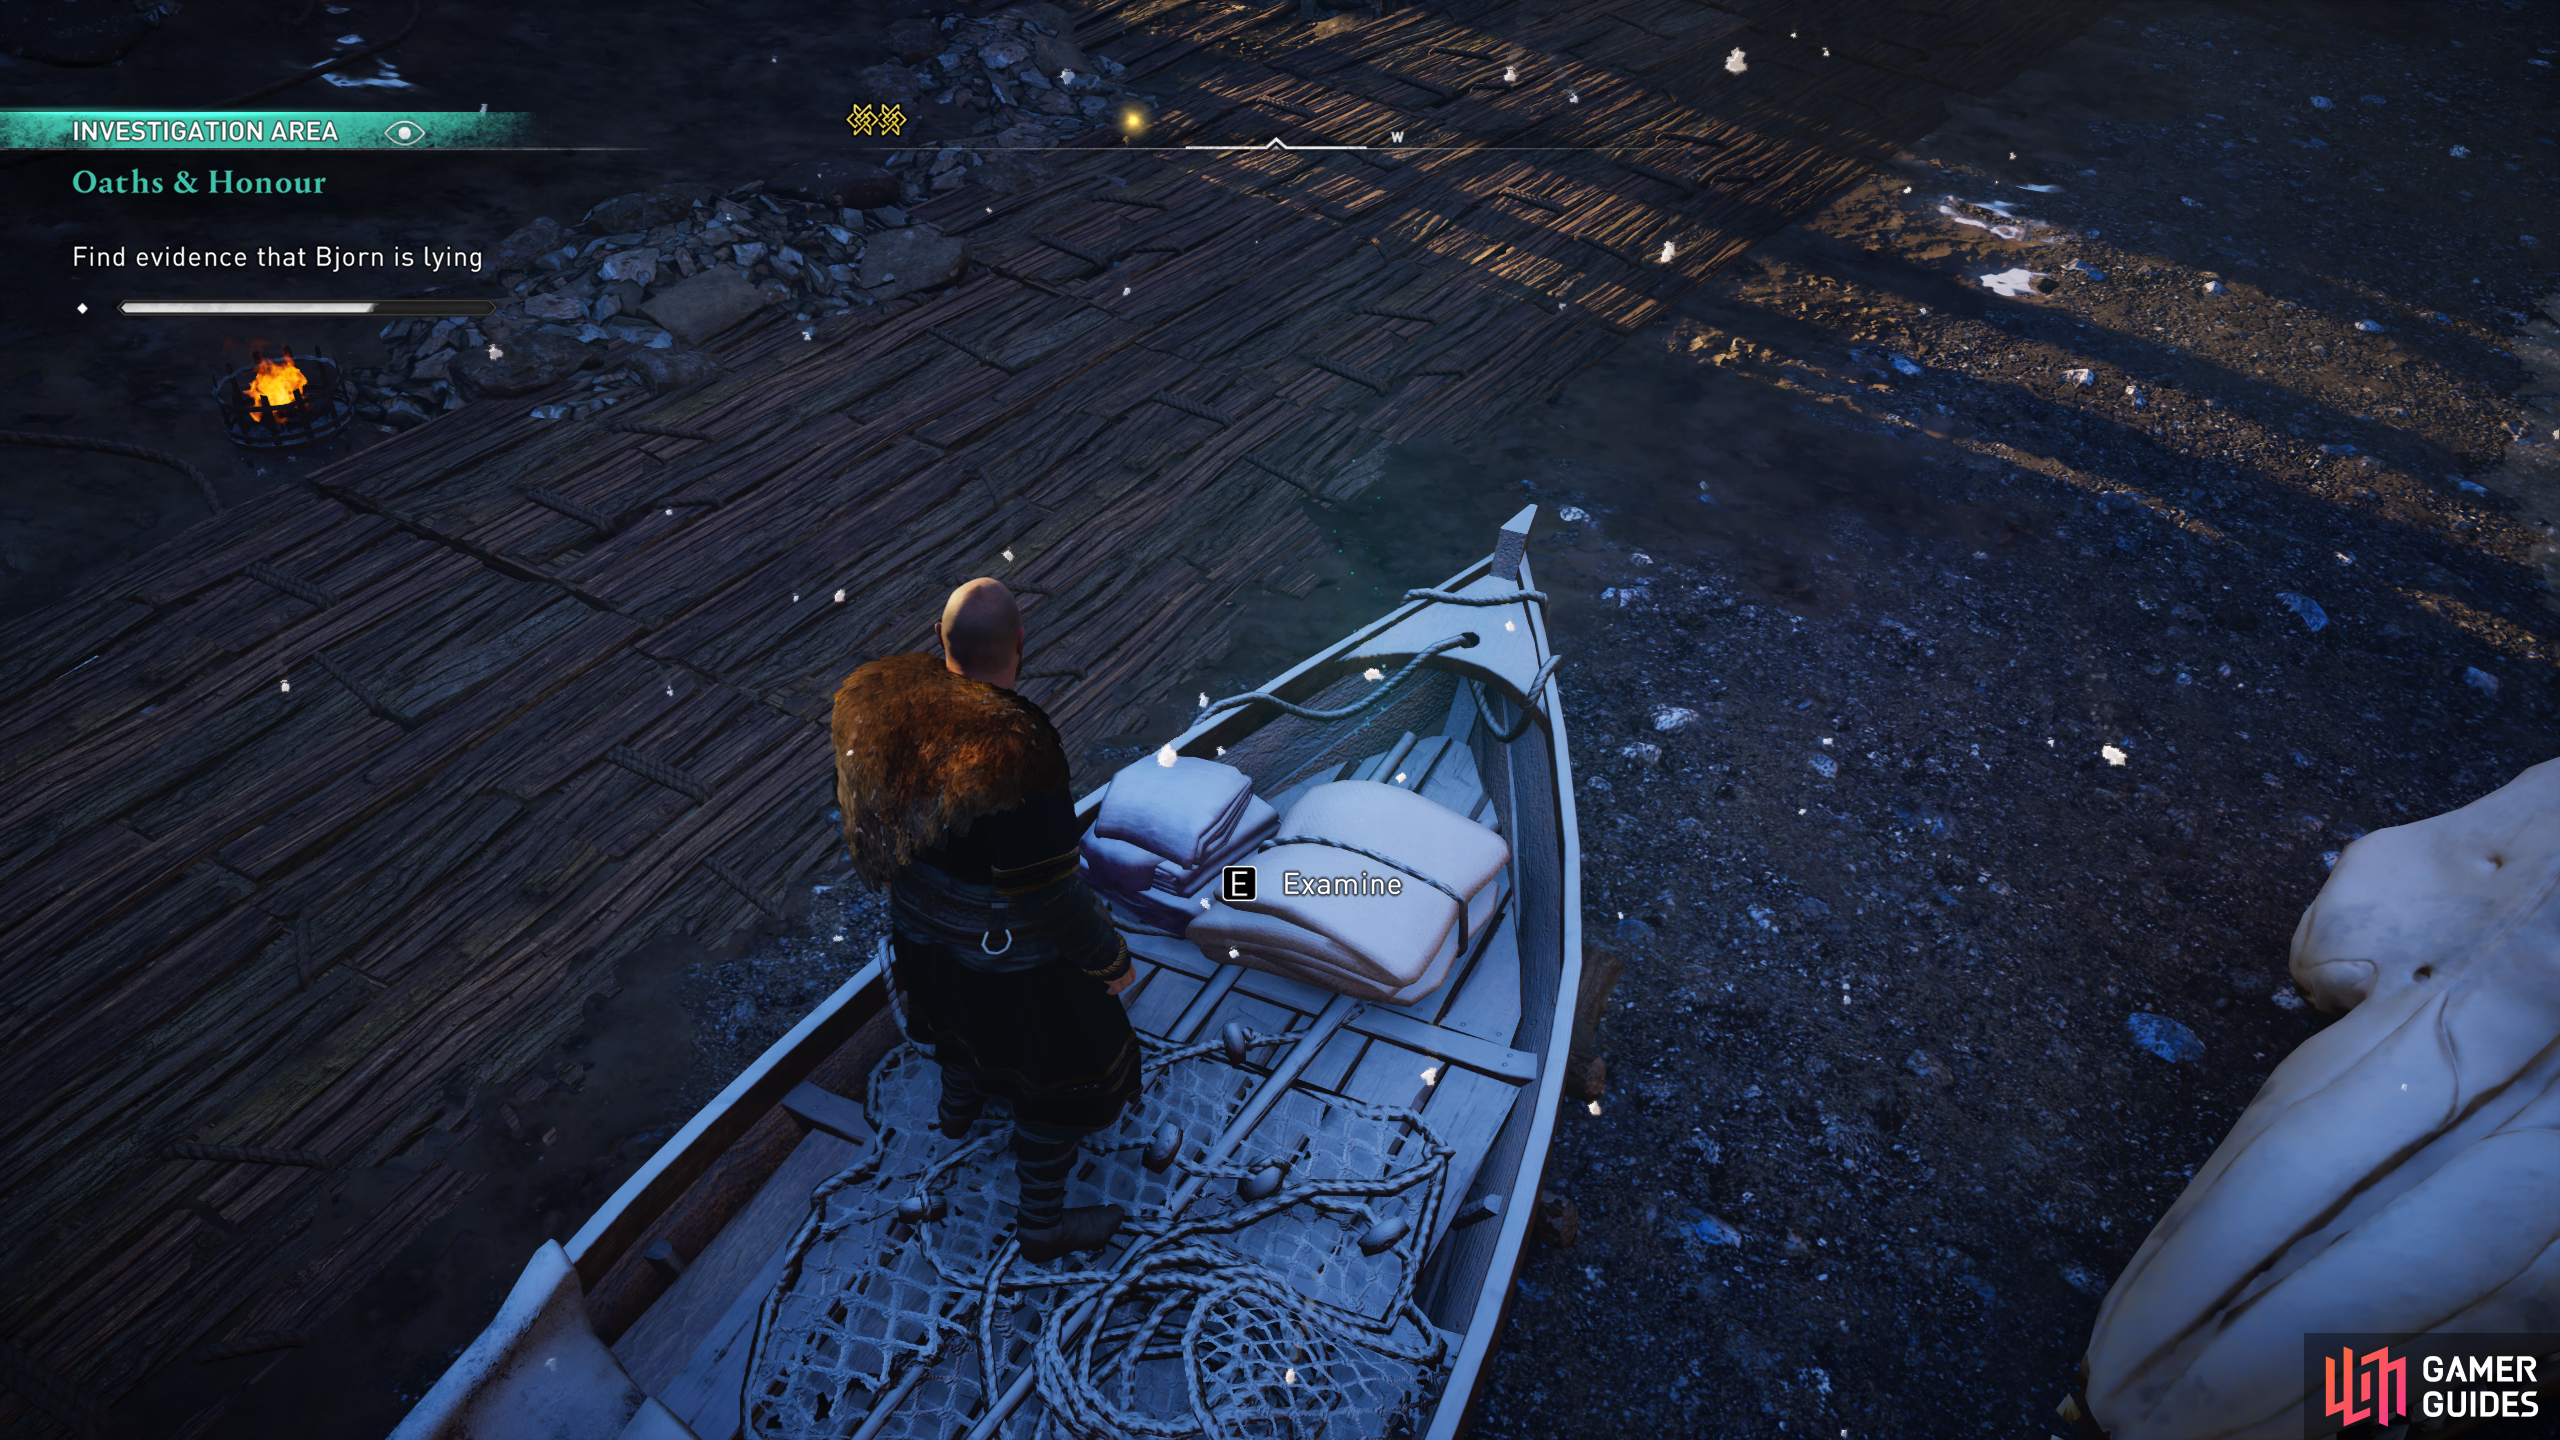 You'll need to examine Gunnhilda's sail in Bjorn's boat.